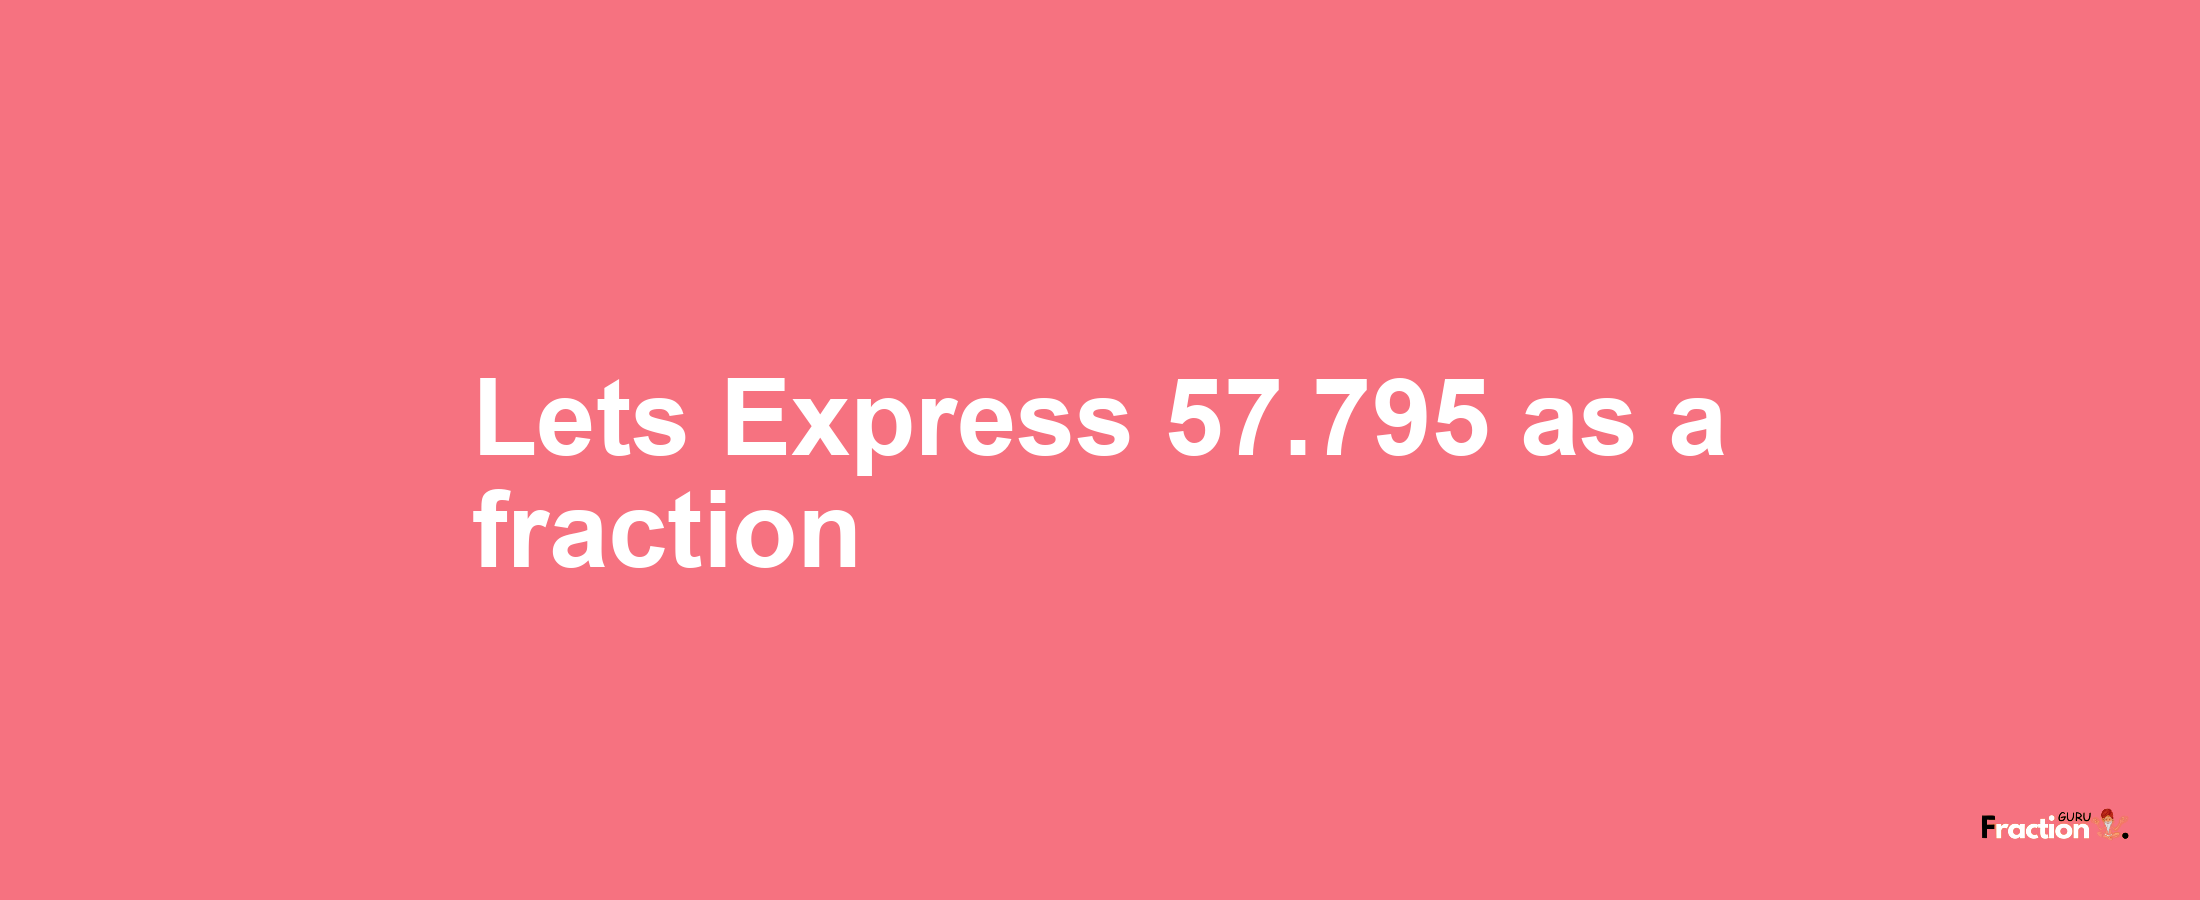 Lets Express 57.795 as afraction